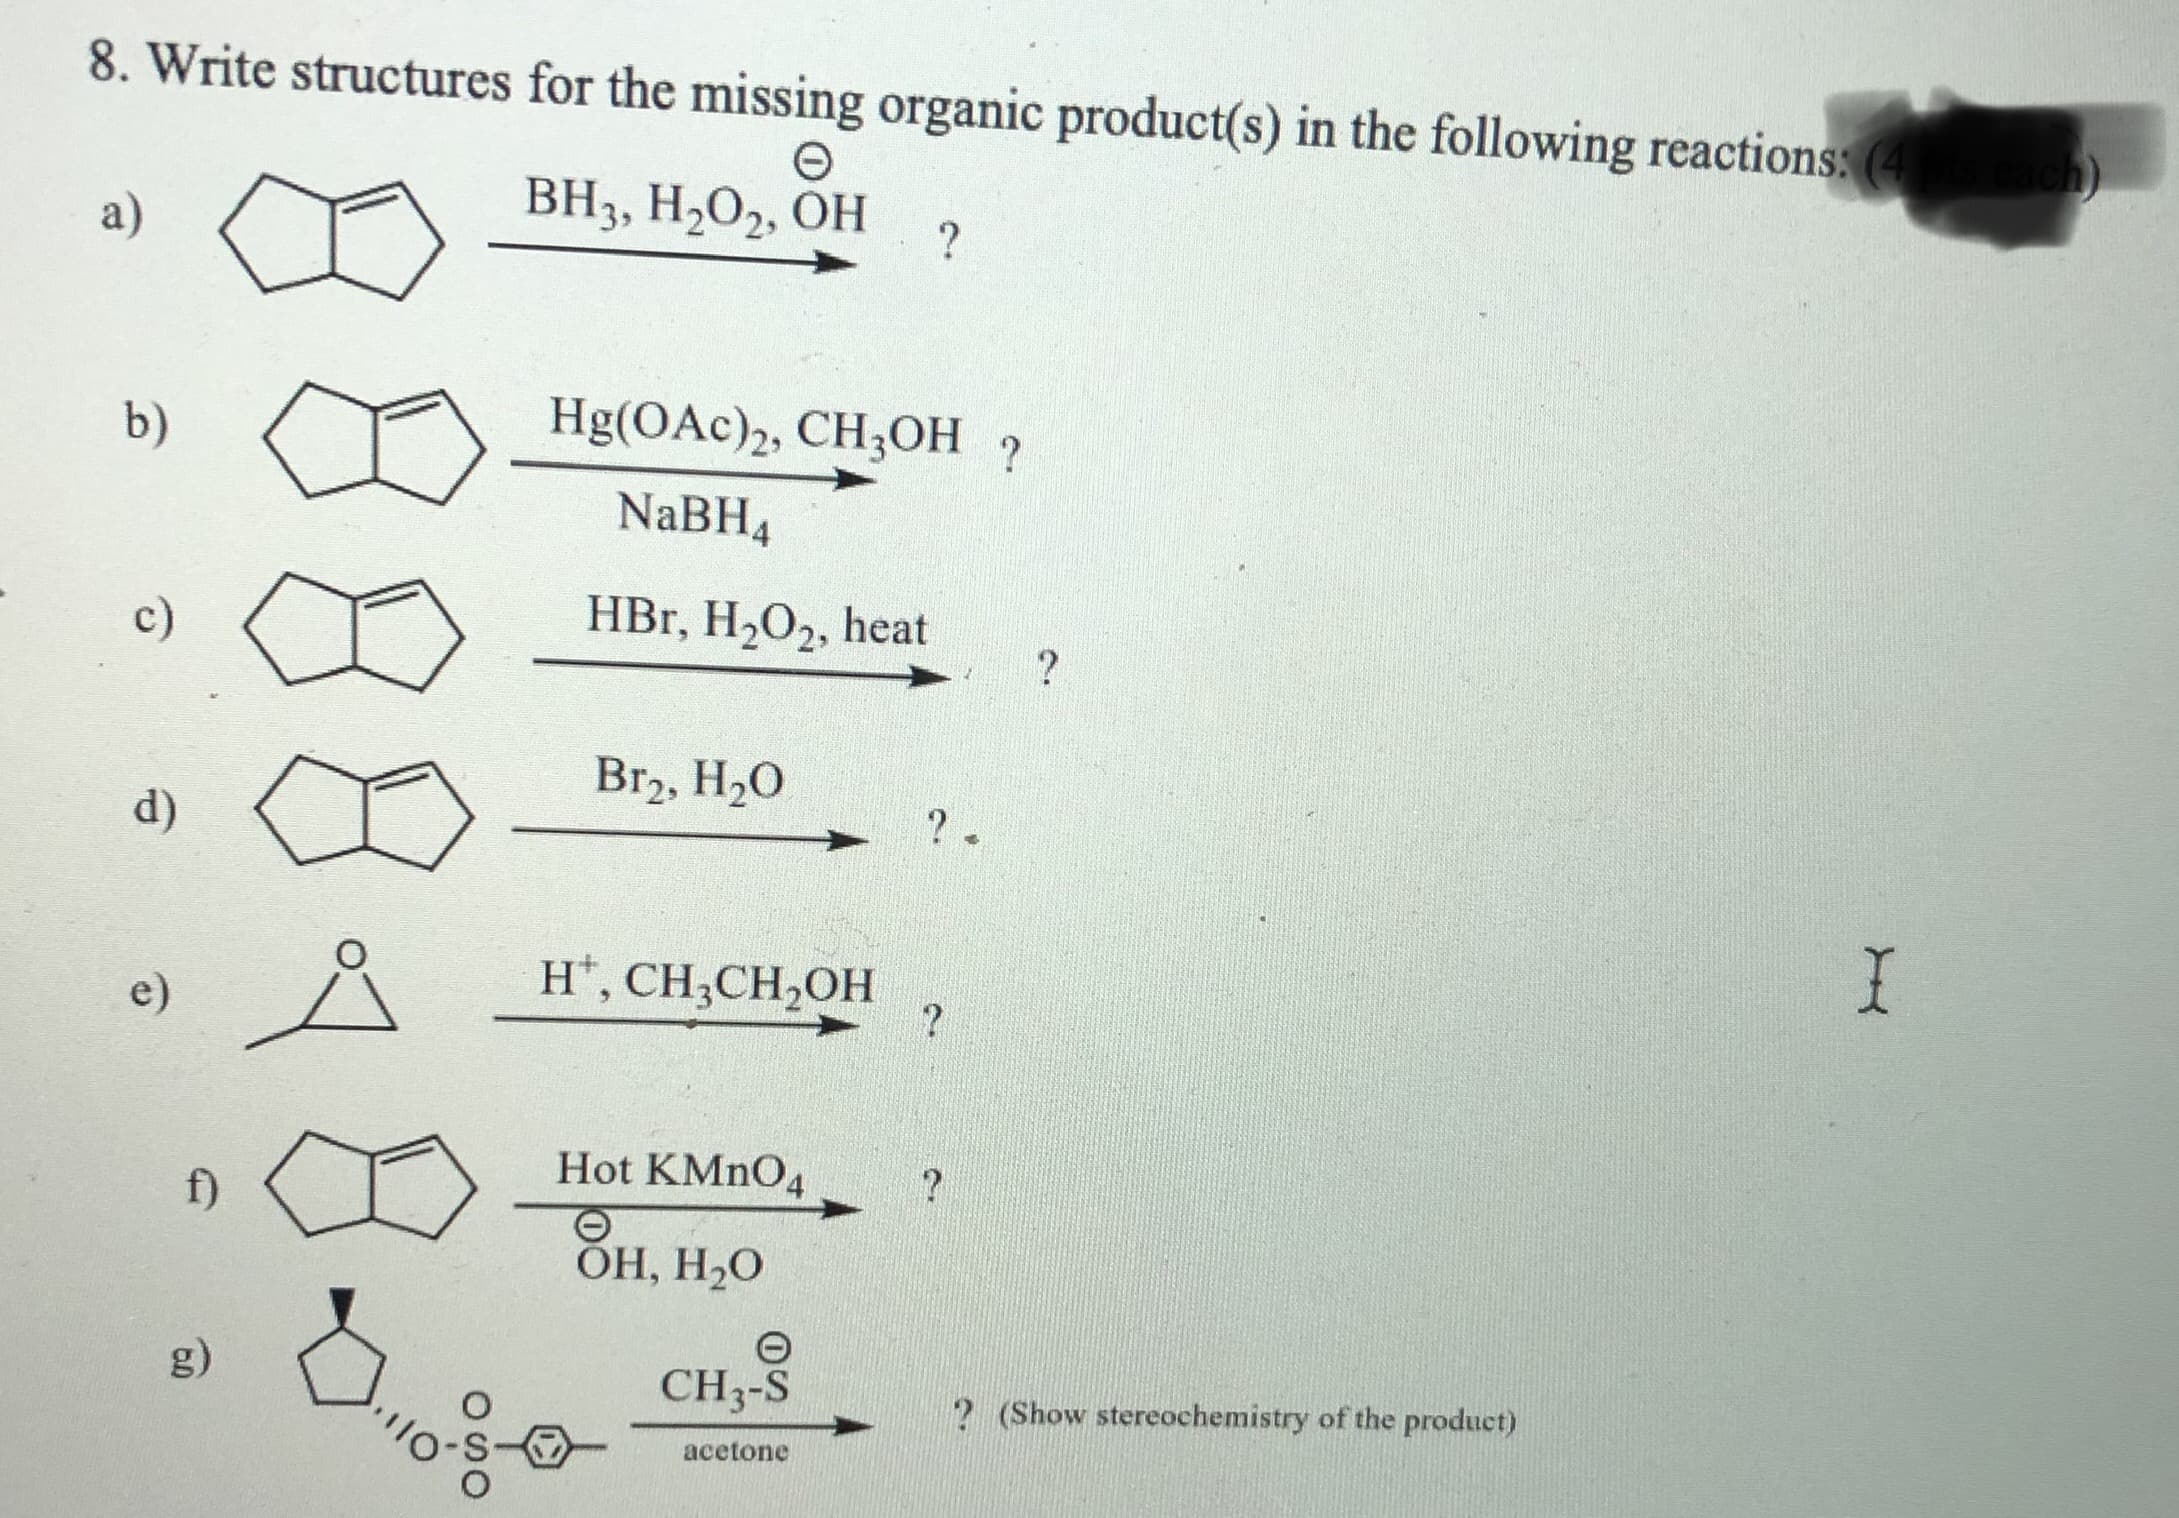 8. Write structures for the missing organic product(s) in the following reactions:
a)
ВН, Н-О2, ОН
?
b)
Hg(OAc)2, CH;OH ?
NaBH4
c)
HBr, H2O2, heat
